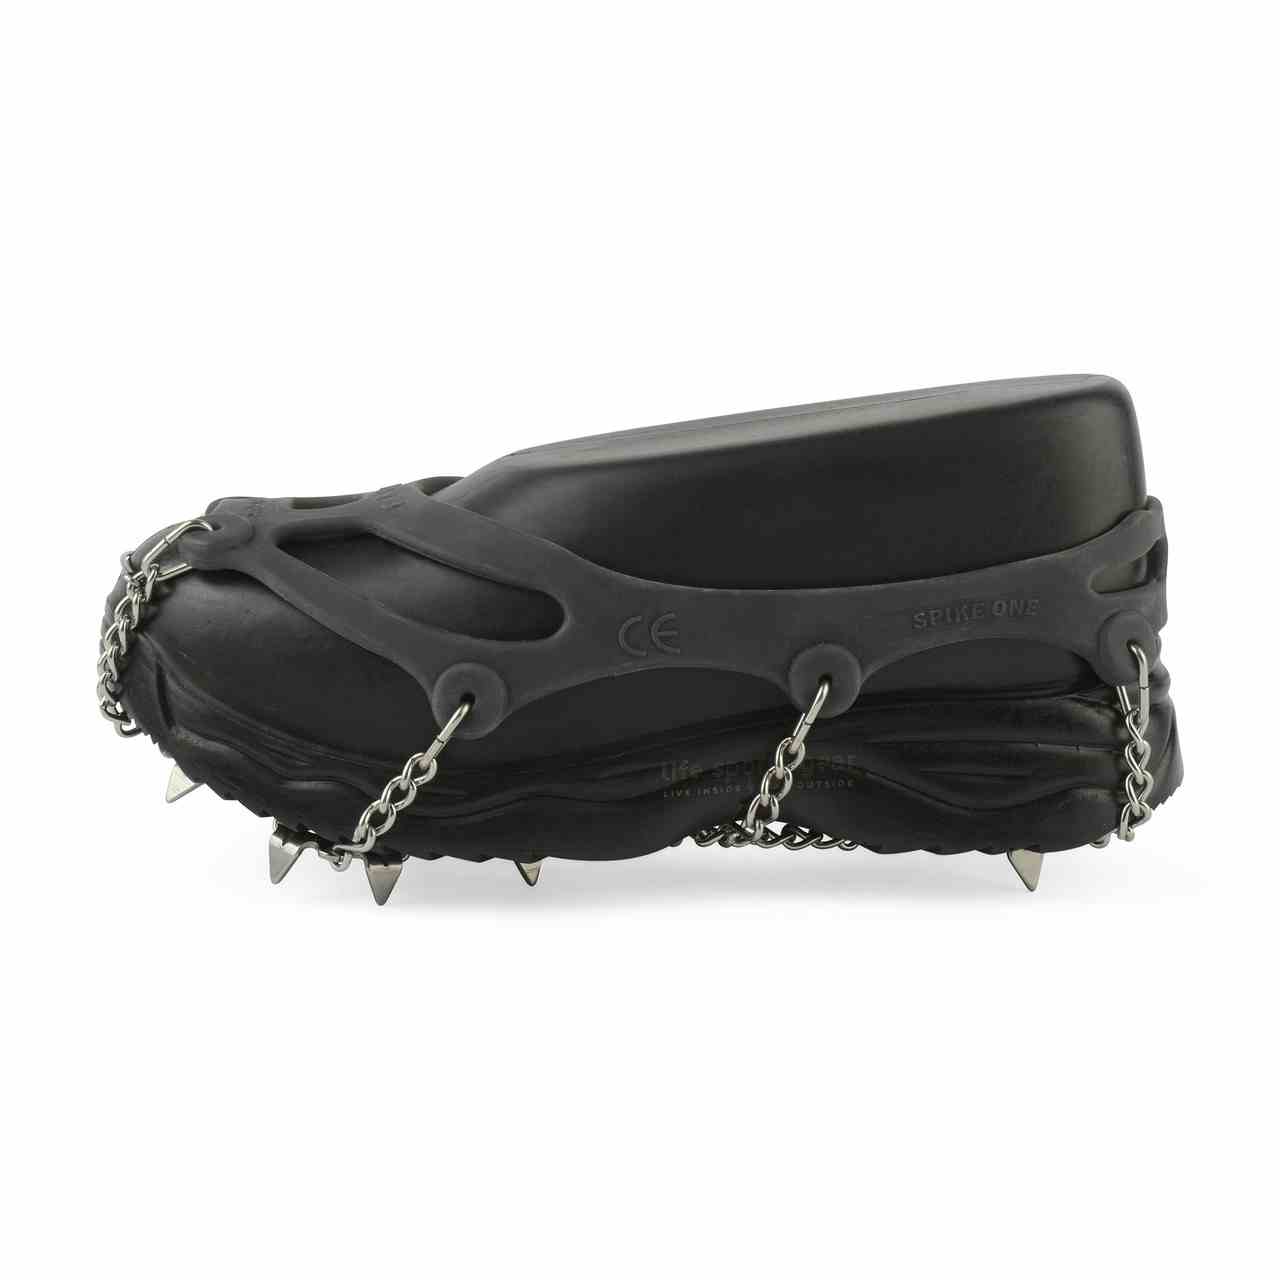 Spike One Traction Device Black